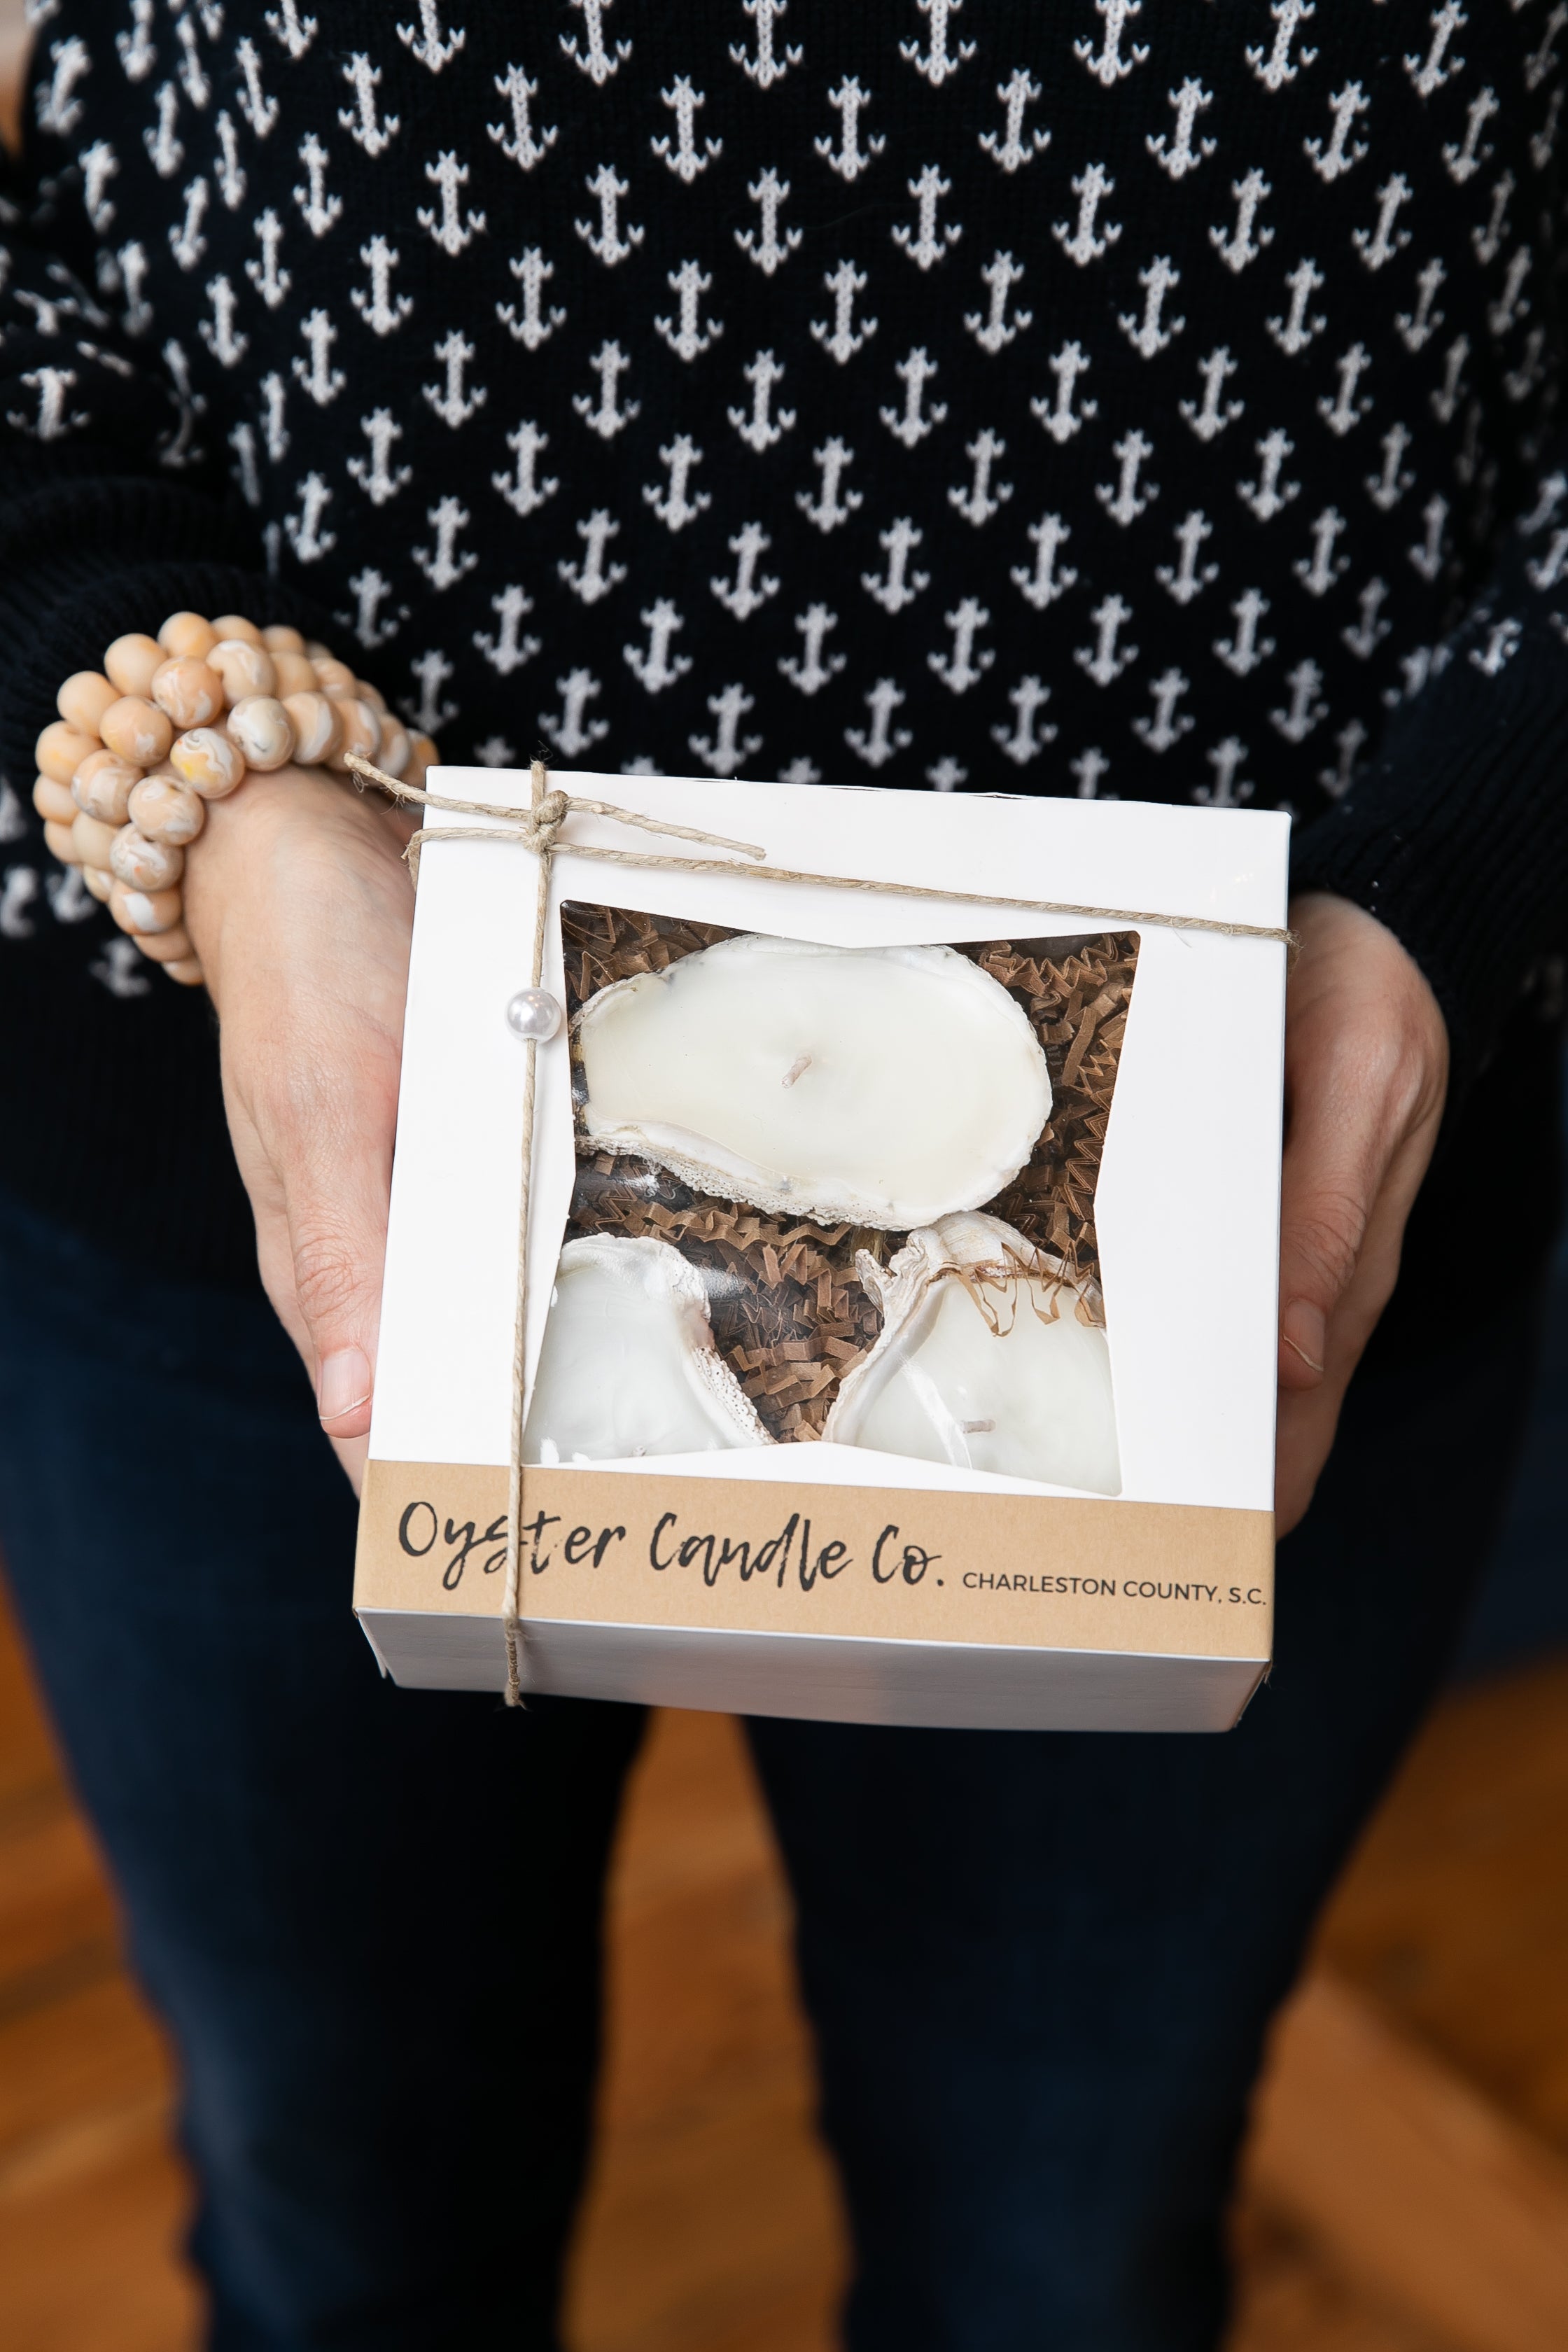 Woman holding gift box with candles from Oyster Candle Company